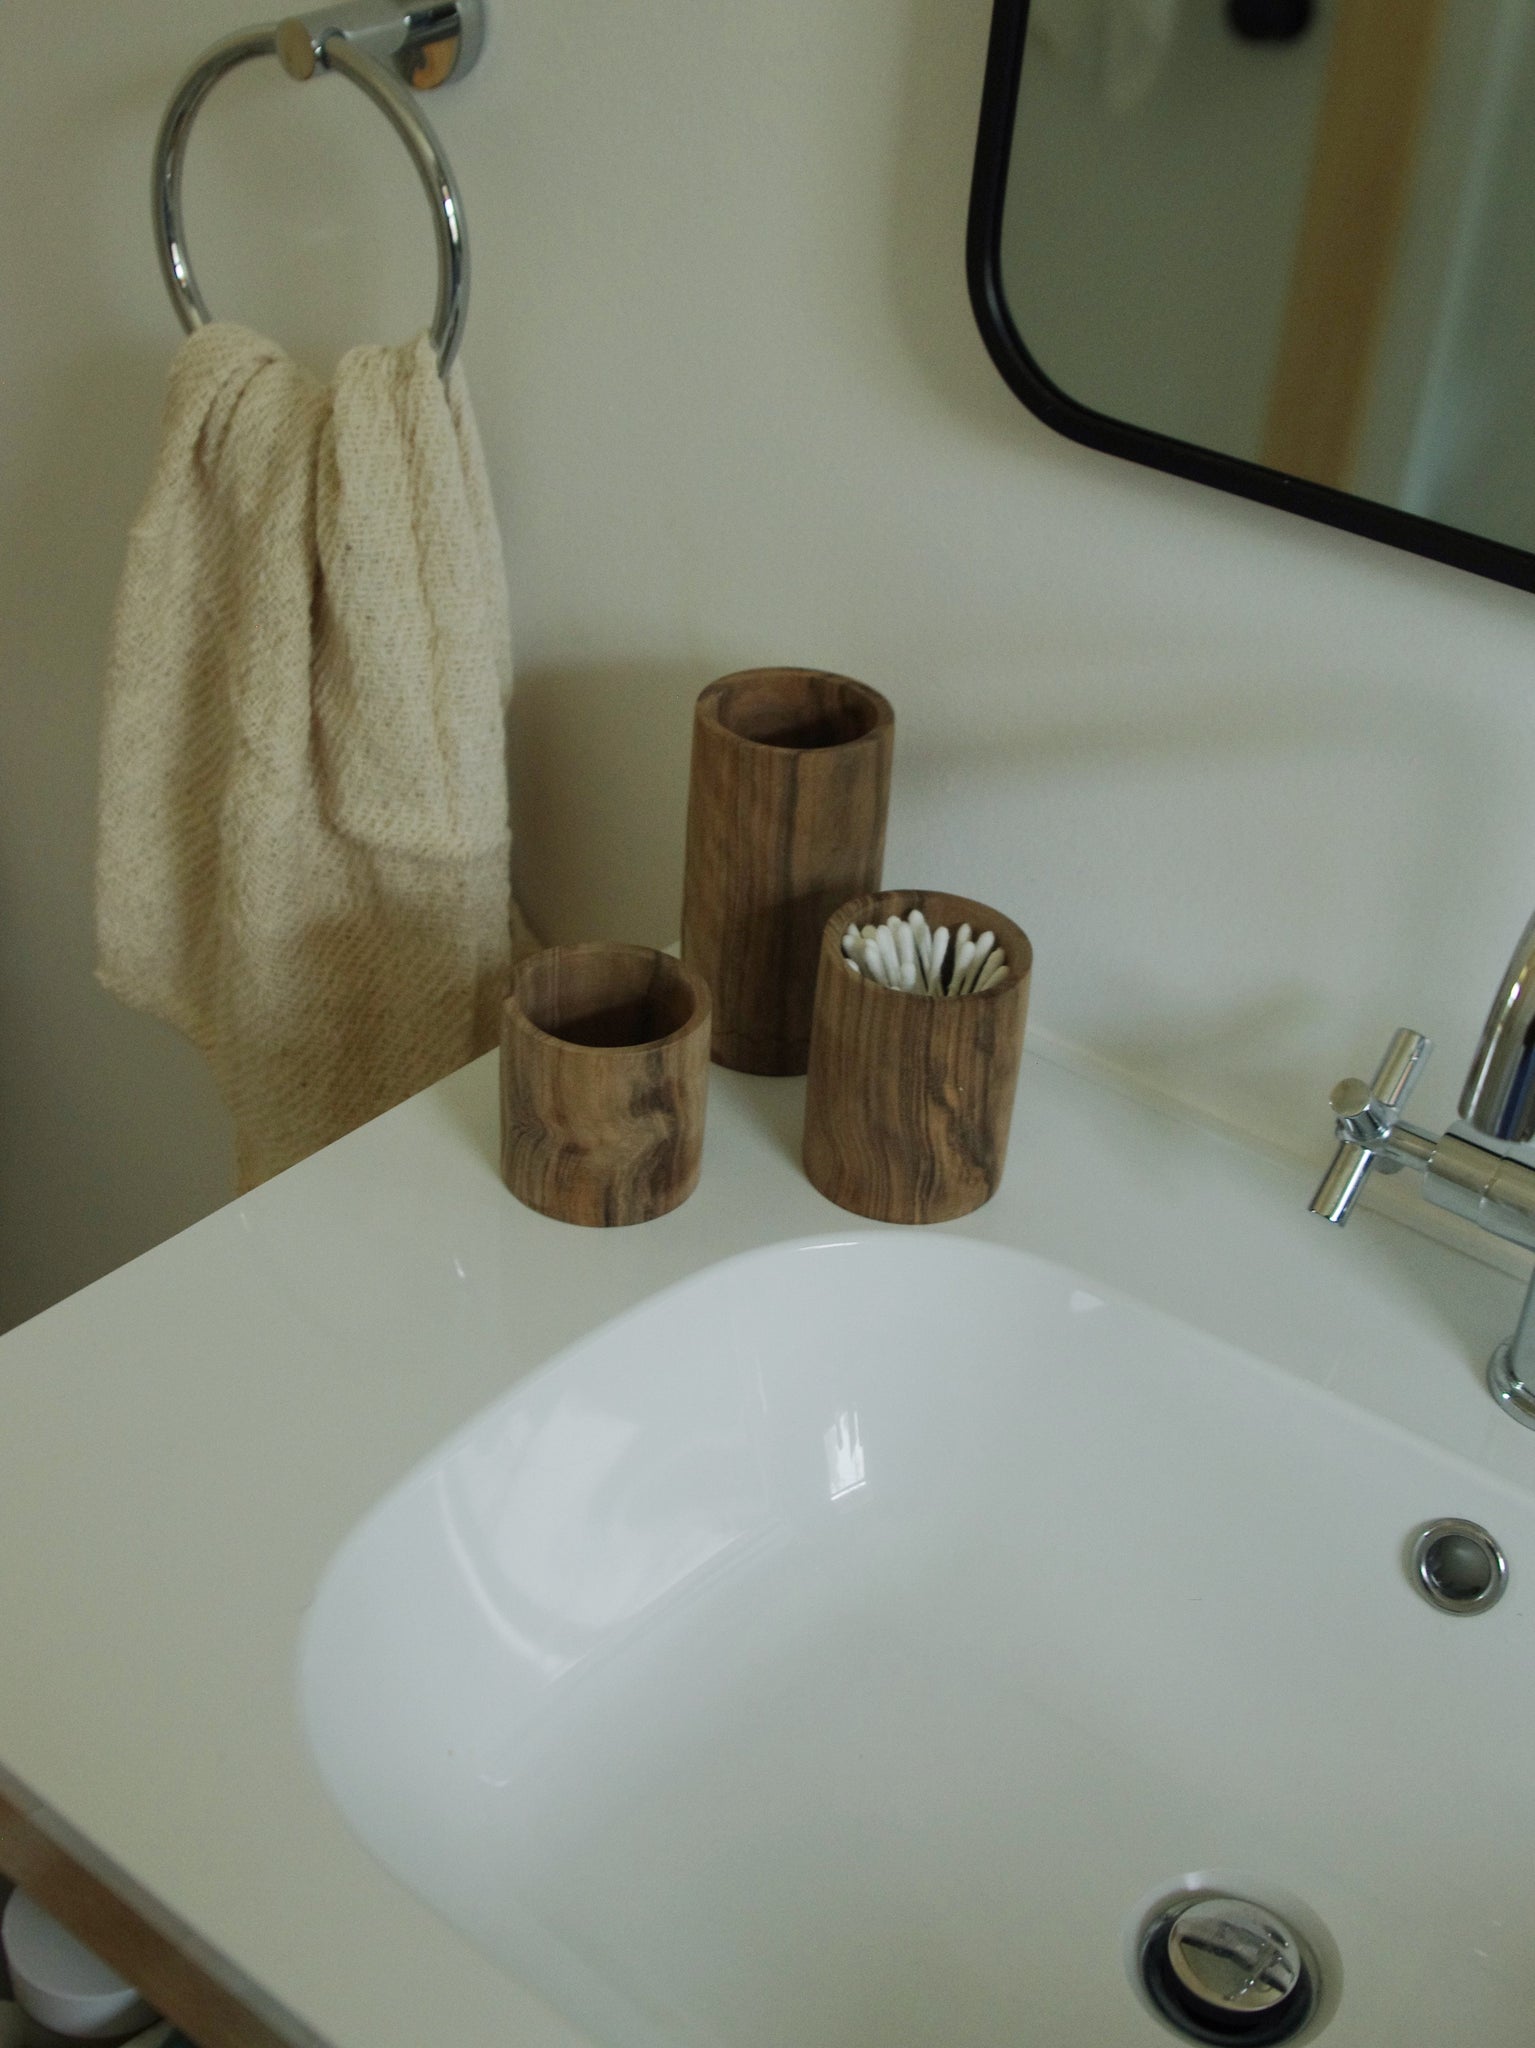 Three wooden cups in a bathroom holding q-tips.